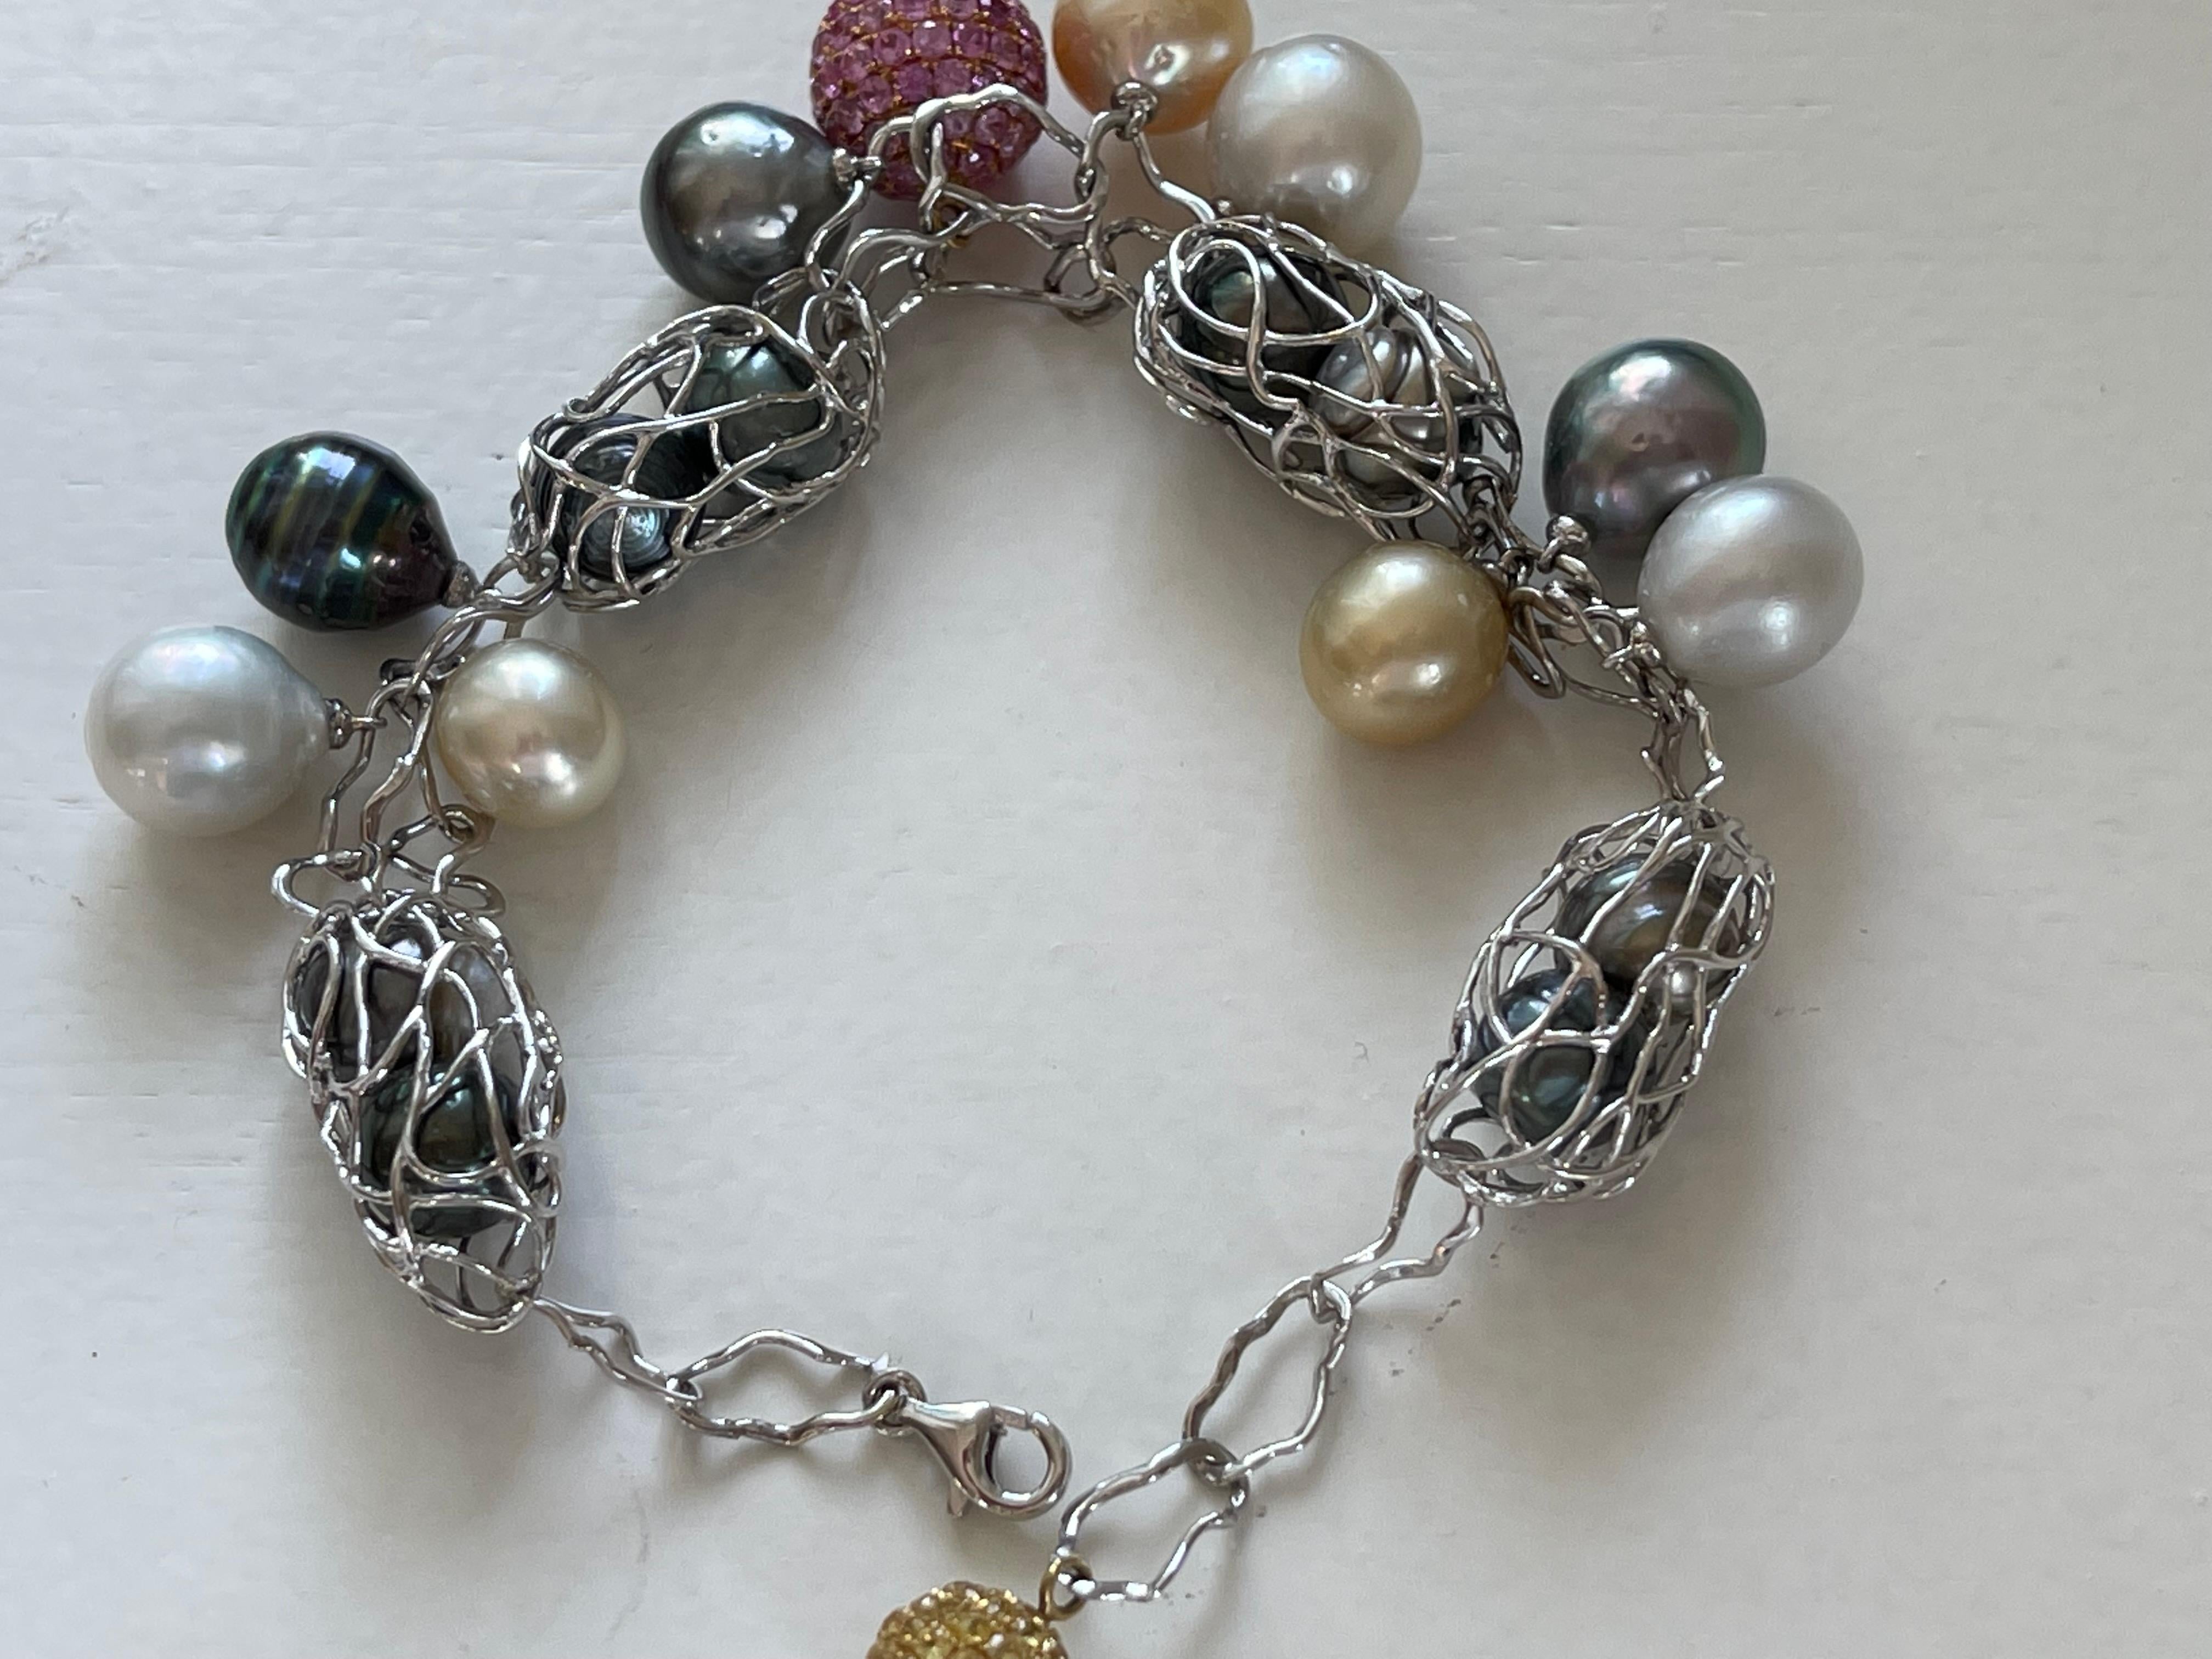 This delicate, stylish charm style bracelet is fashioned from 18 K white Gold interlocking wire circles featuring 6 golden and white South Sea Pearls pearls and 11 Tahitian Pearls and 2 balls all pavé set with yellow and pink Sapphires weihging 6.50